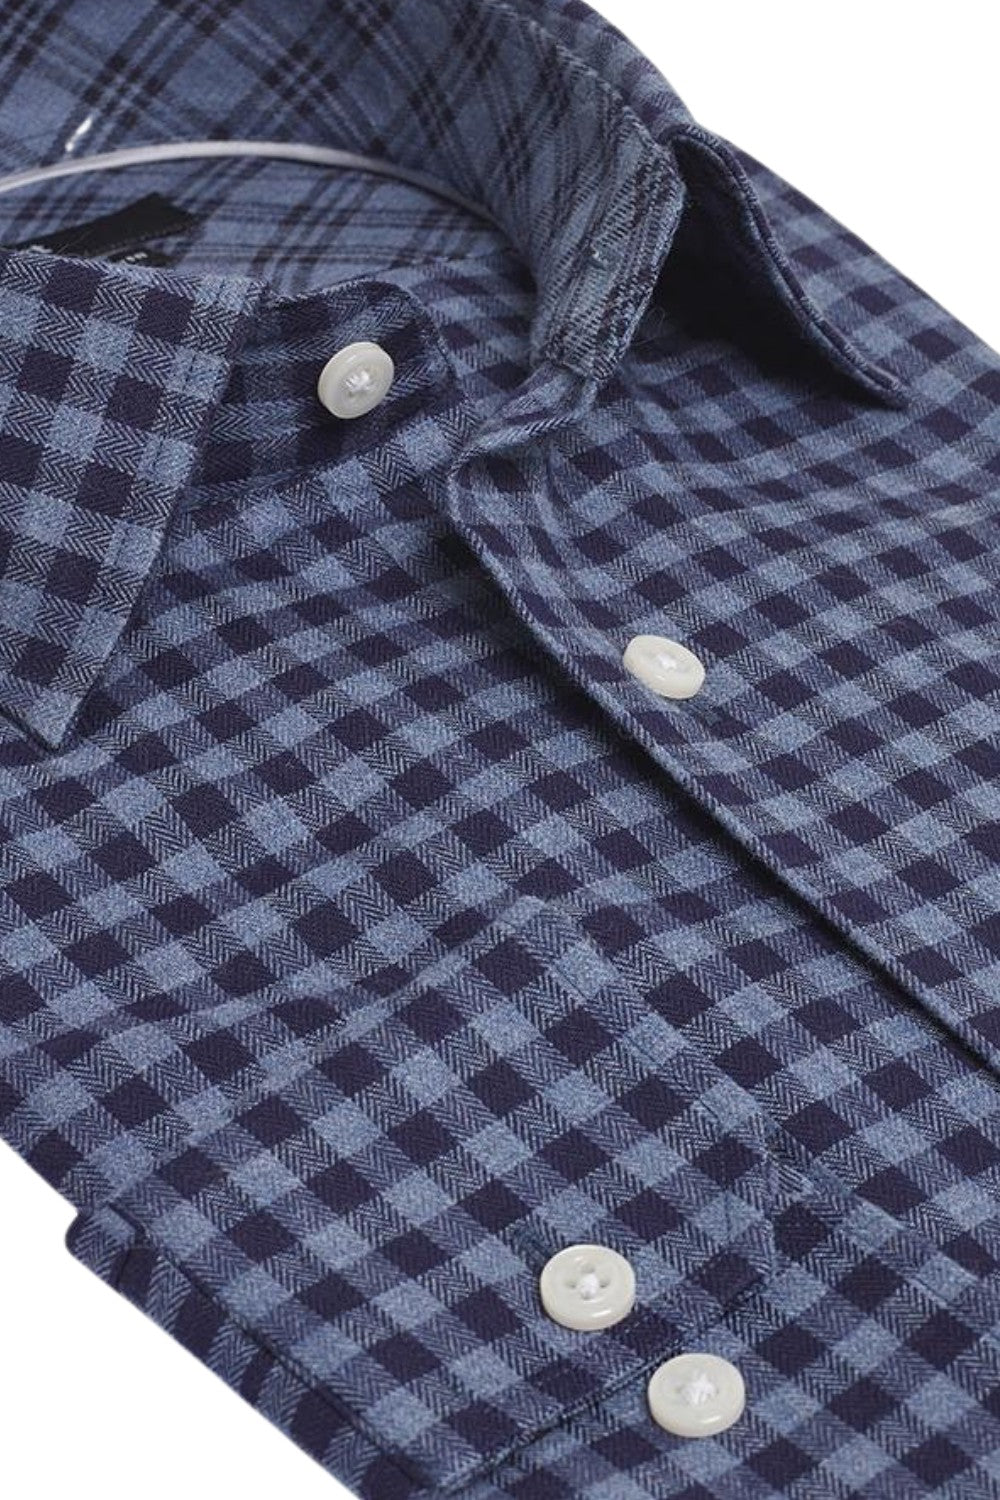 WILLIAMS BLUE CHECKERED BUTTON DOWN DRESS SHIRT - CASUAL /FORMAL EVENT - SIDE VIEW